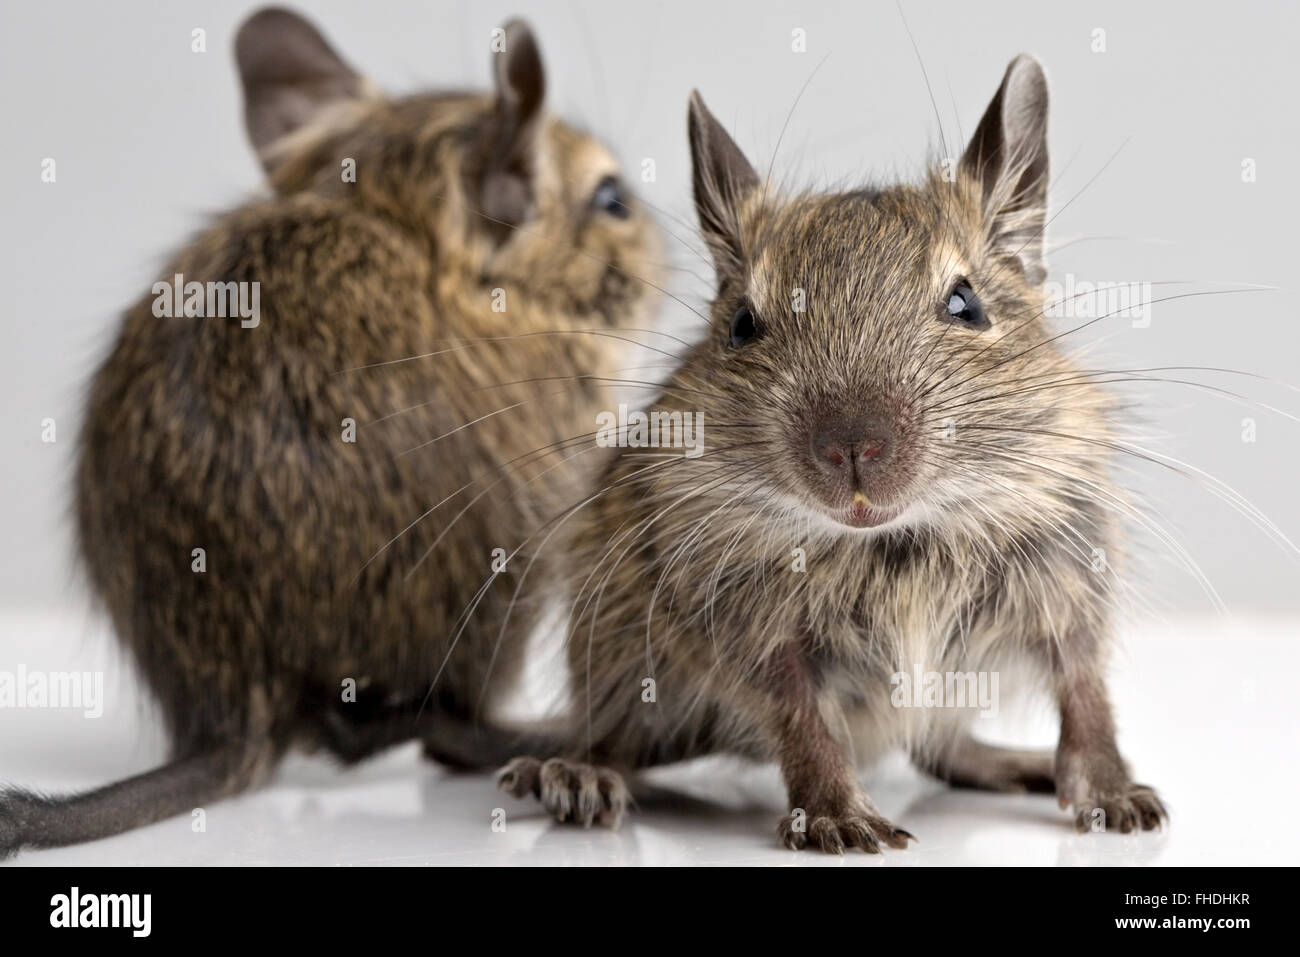 two little baby degu mice closeup front view on neutral background Stock Photo